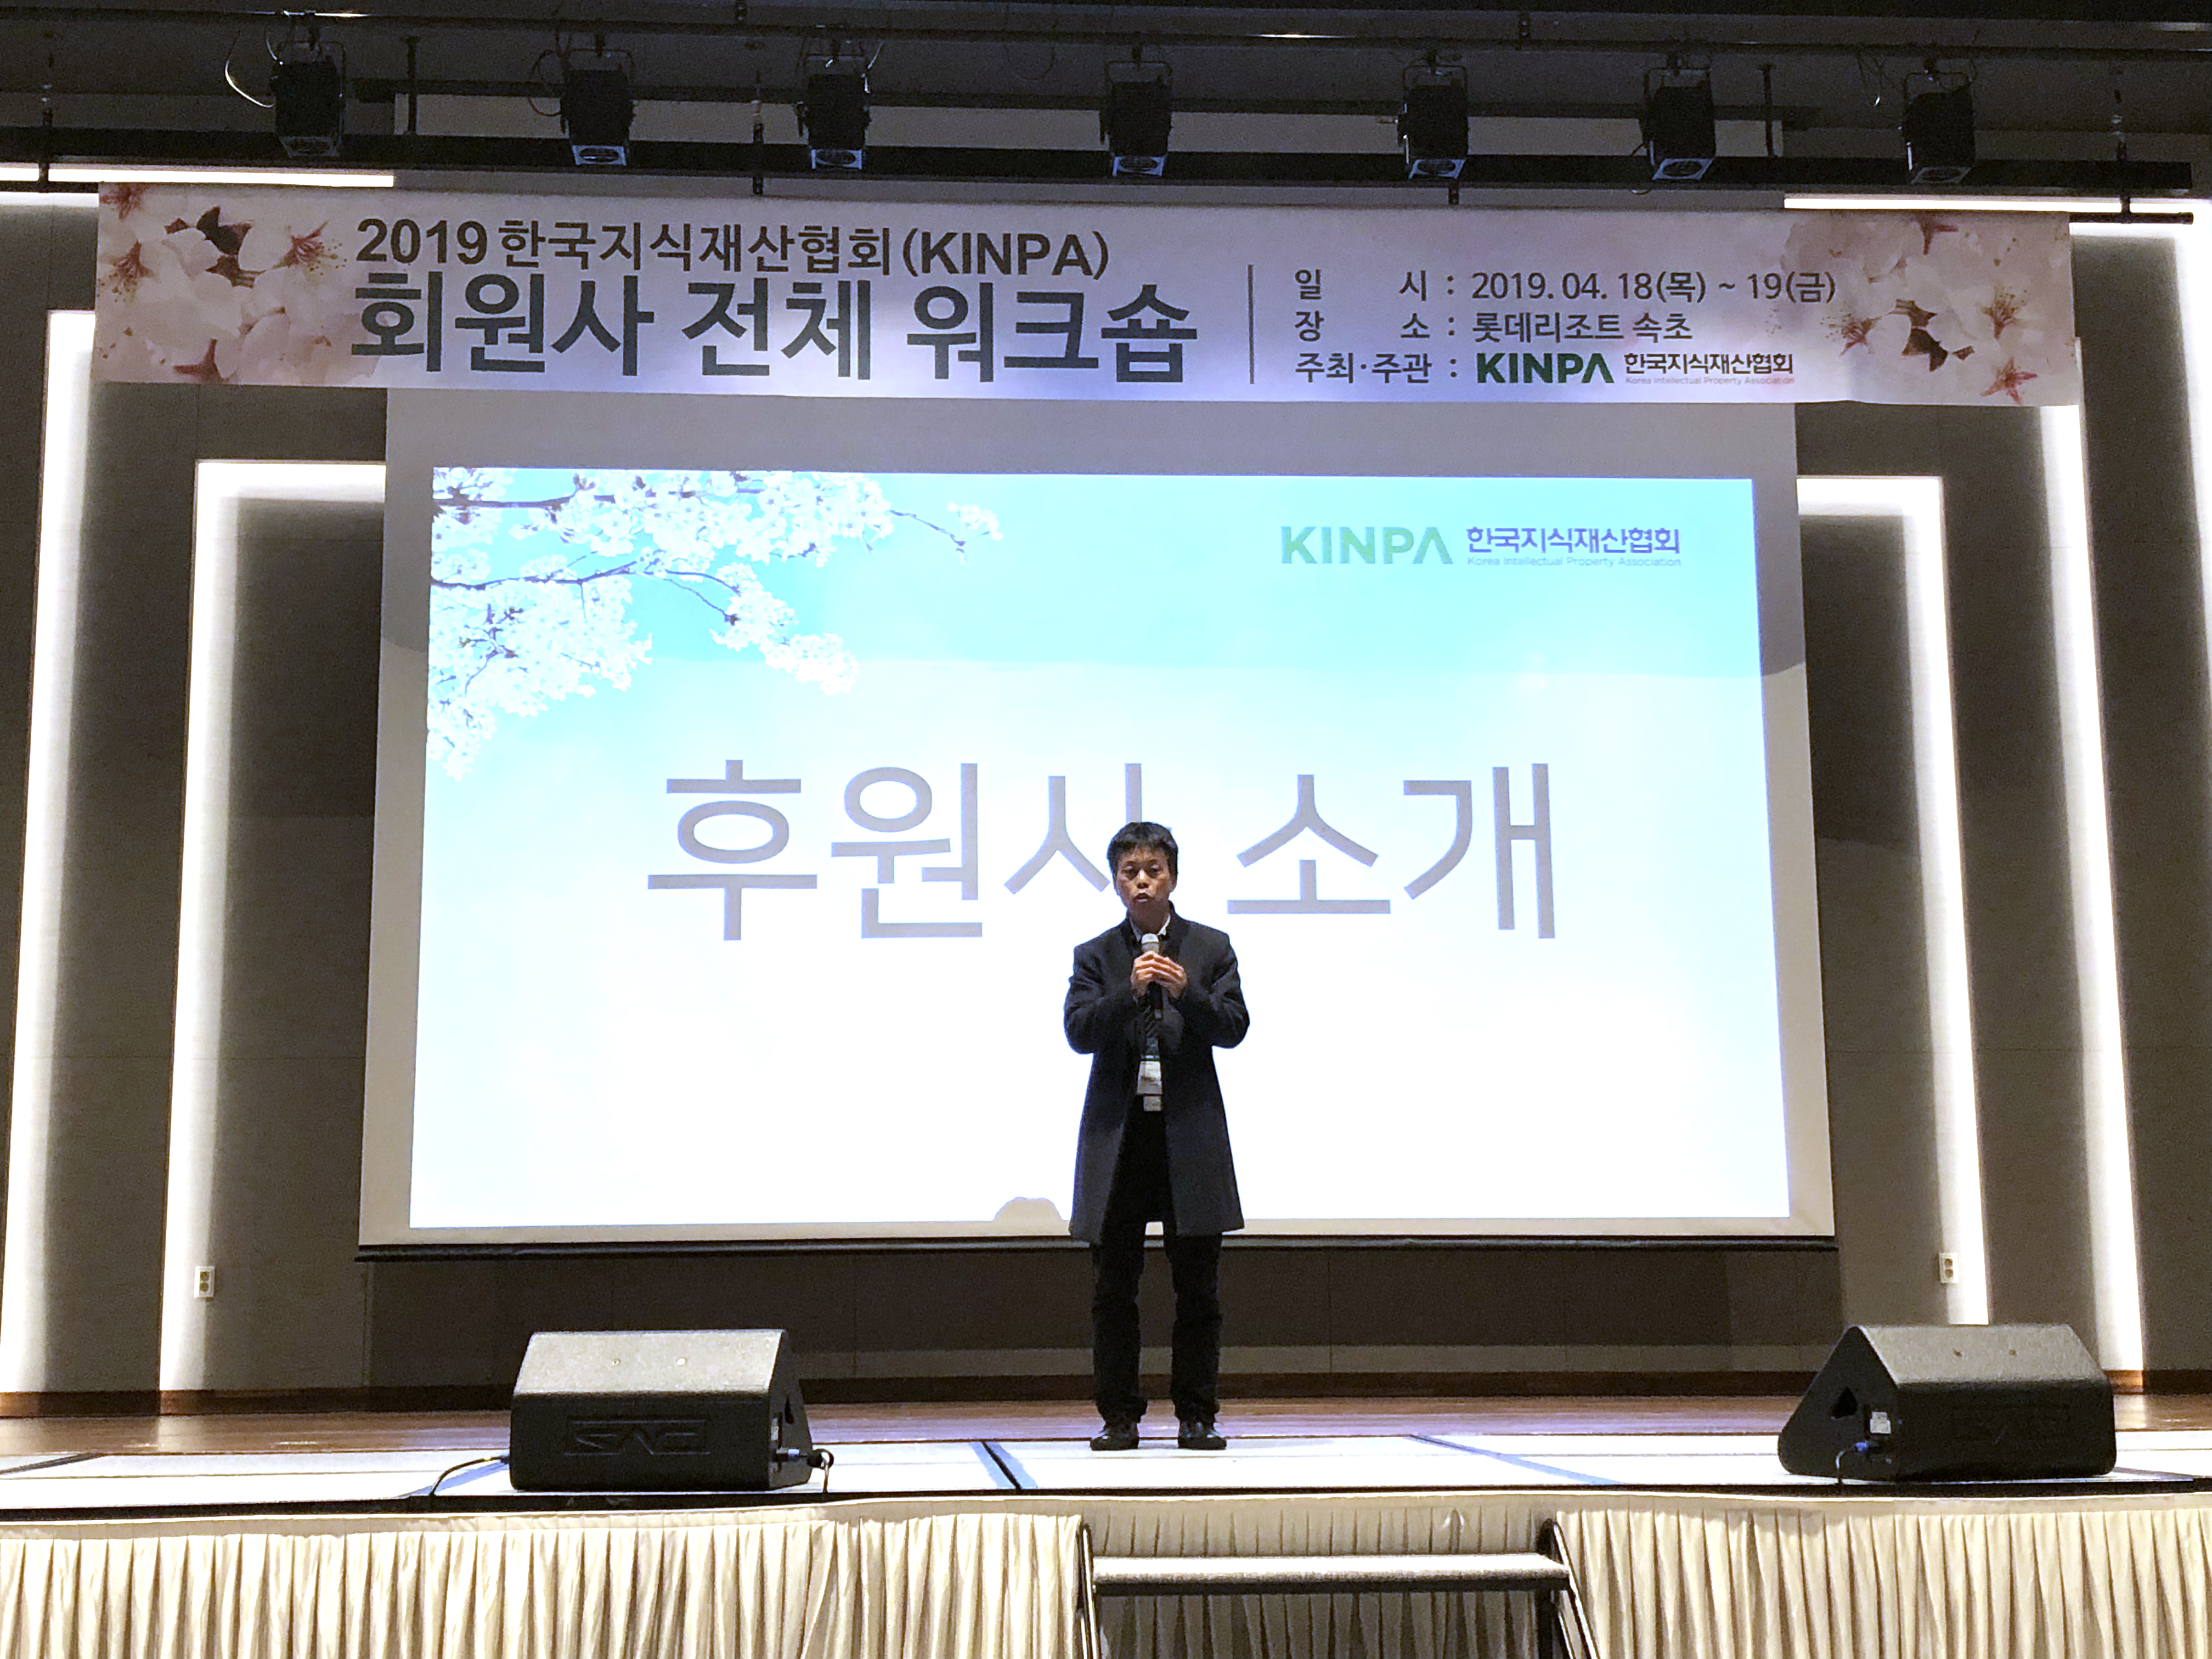 Dr. Wenguo Dong and Fanwen Kong attended KINPA workshop